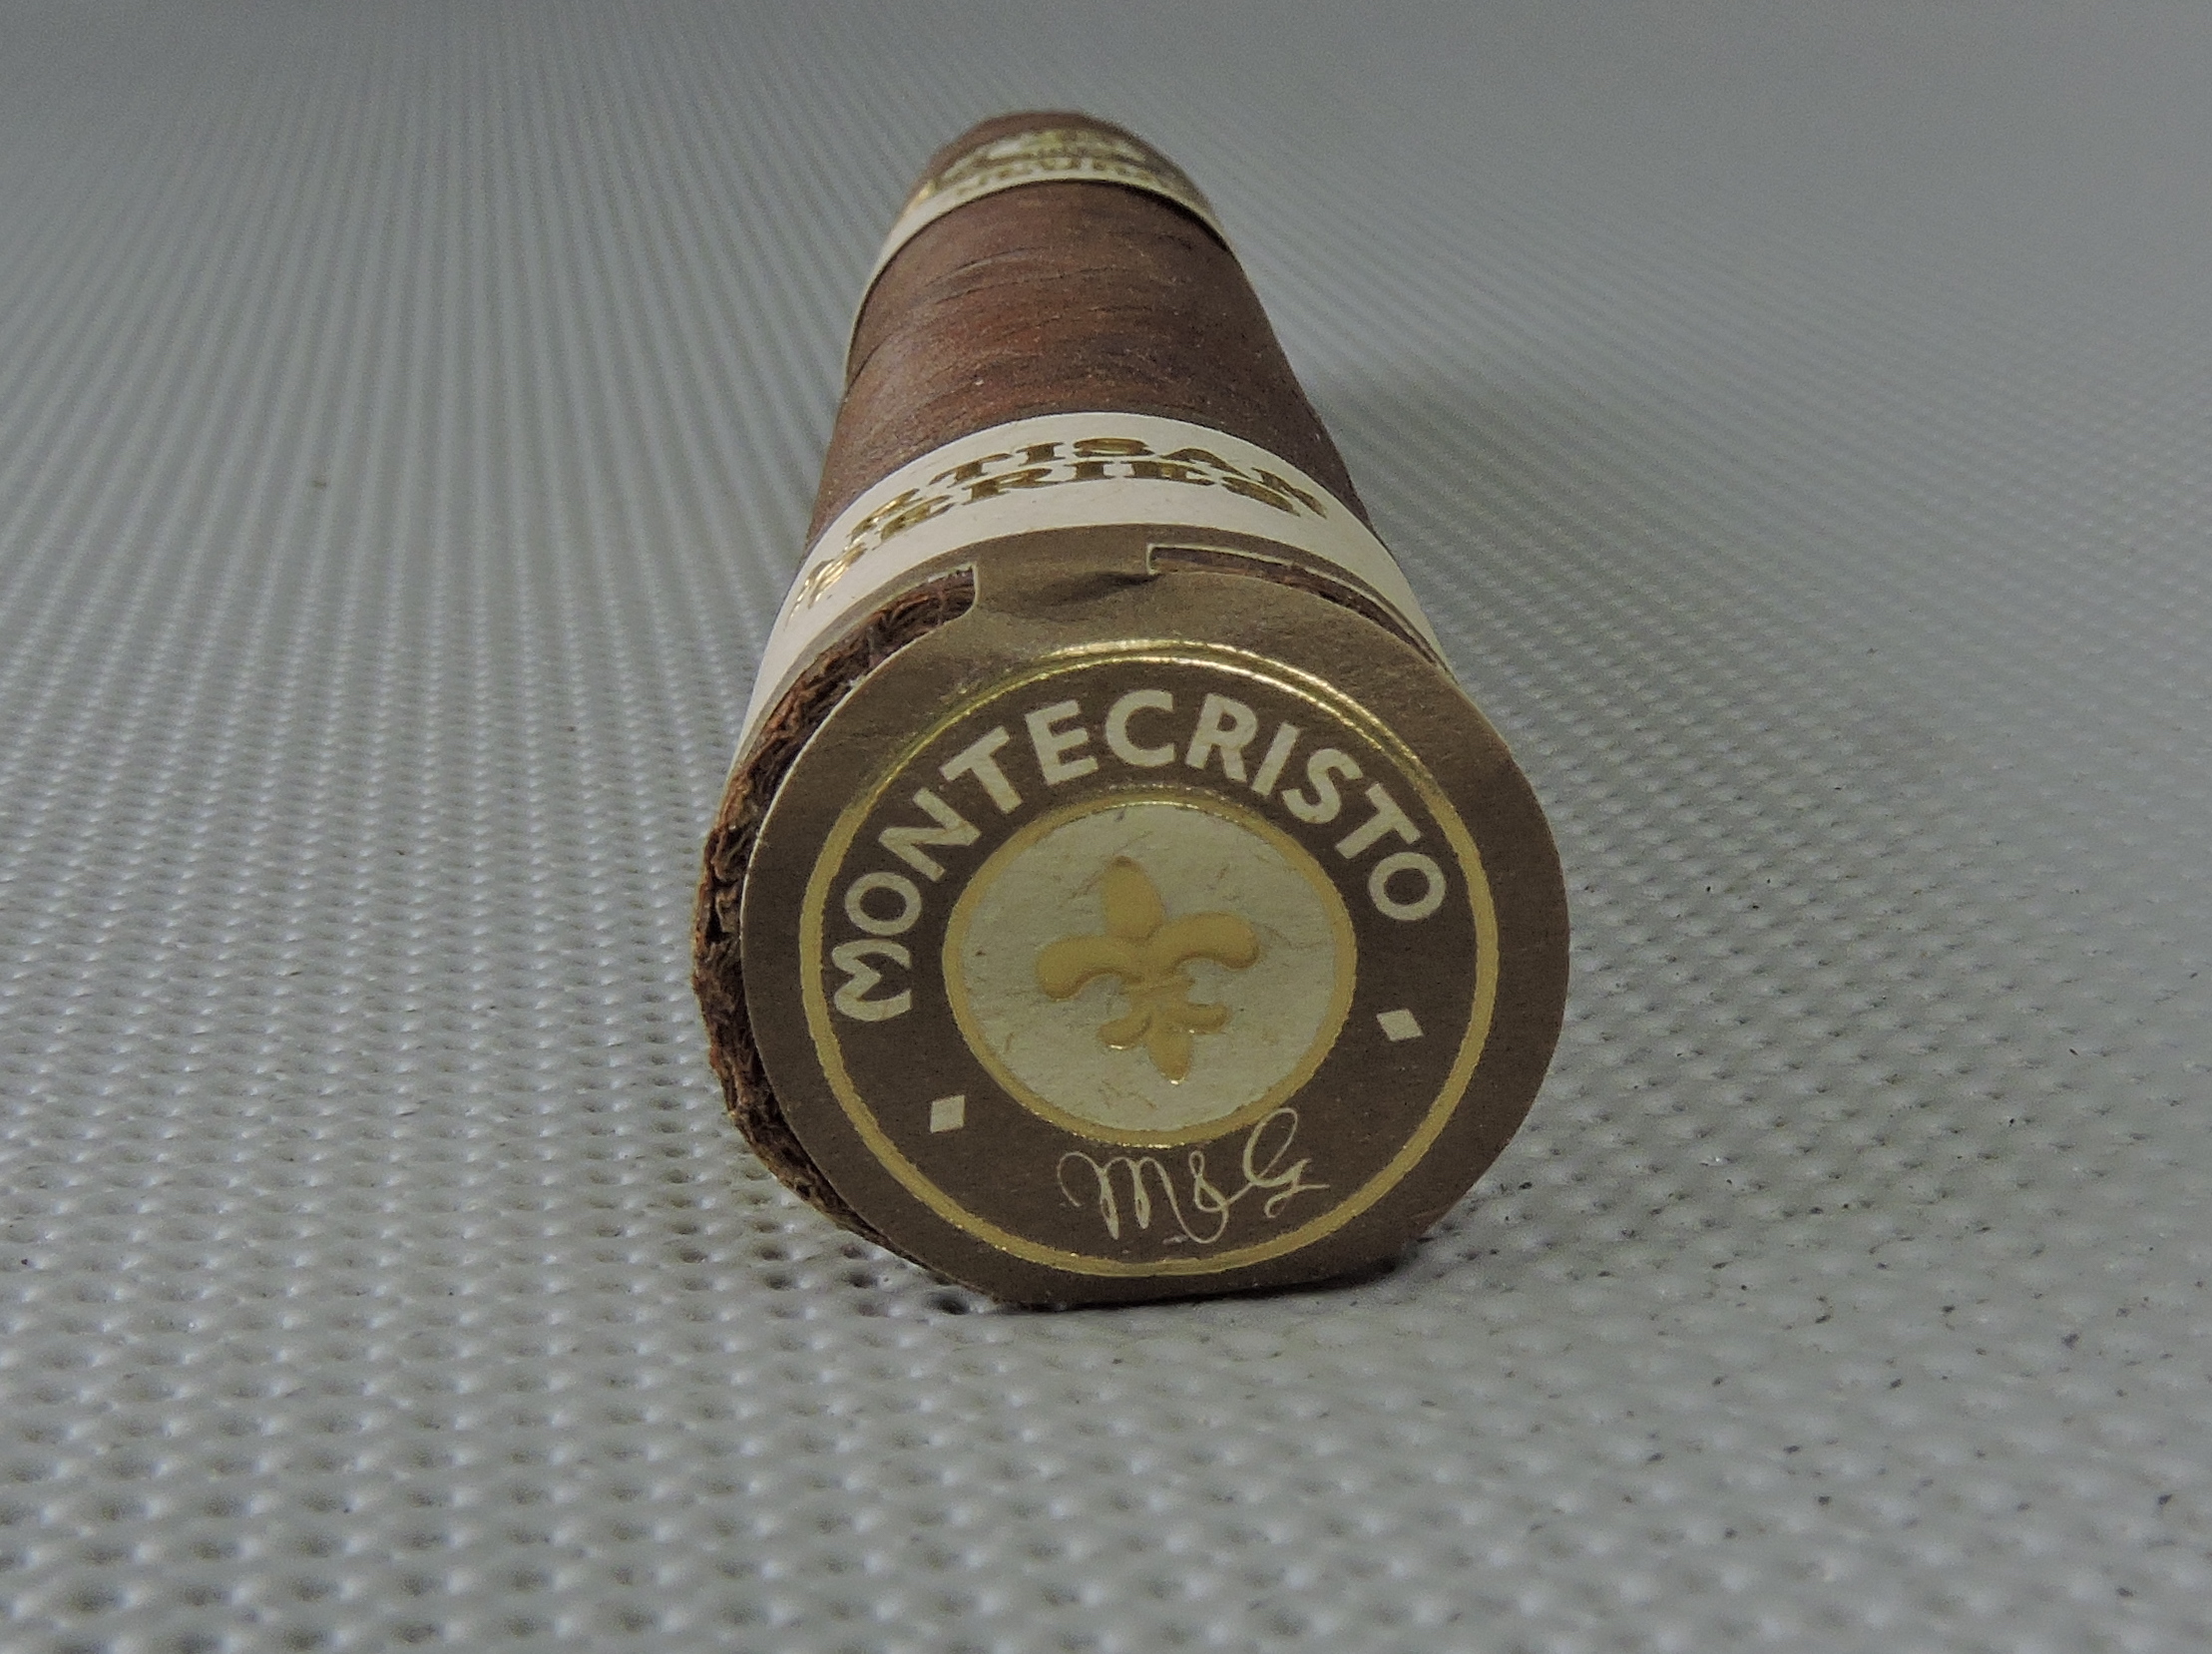 Footer Cover to the Montecristo Artisan Series Batch 1